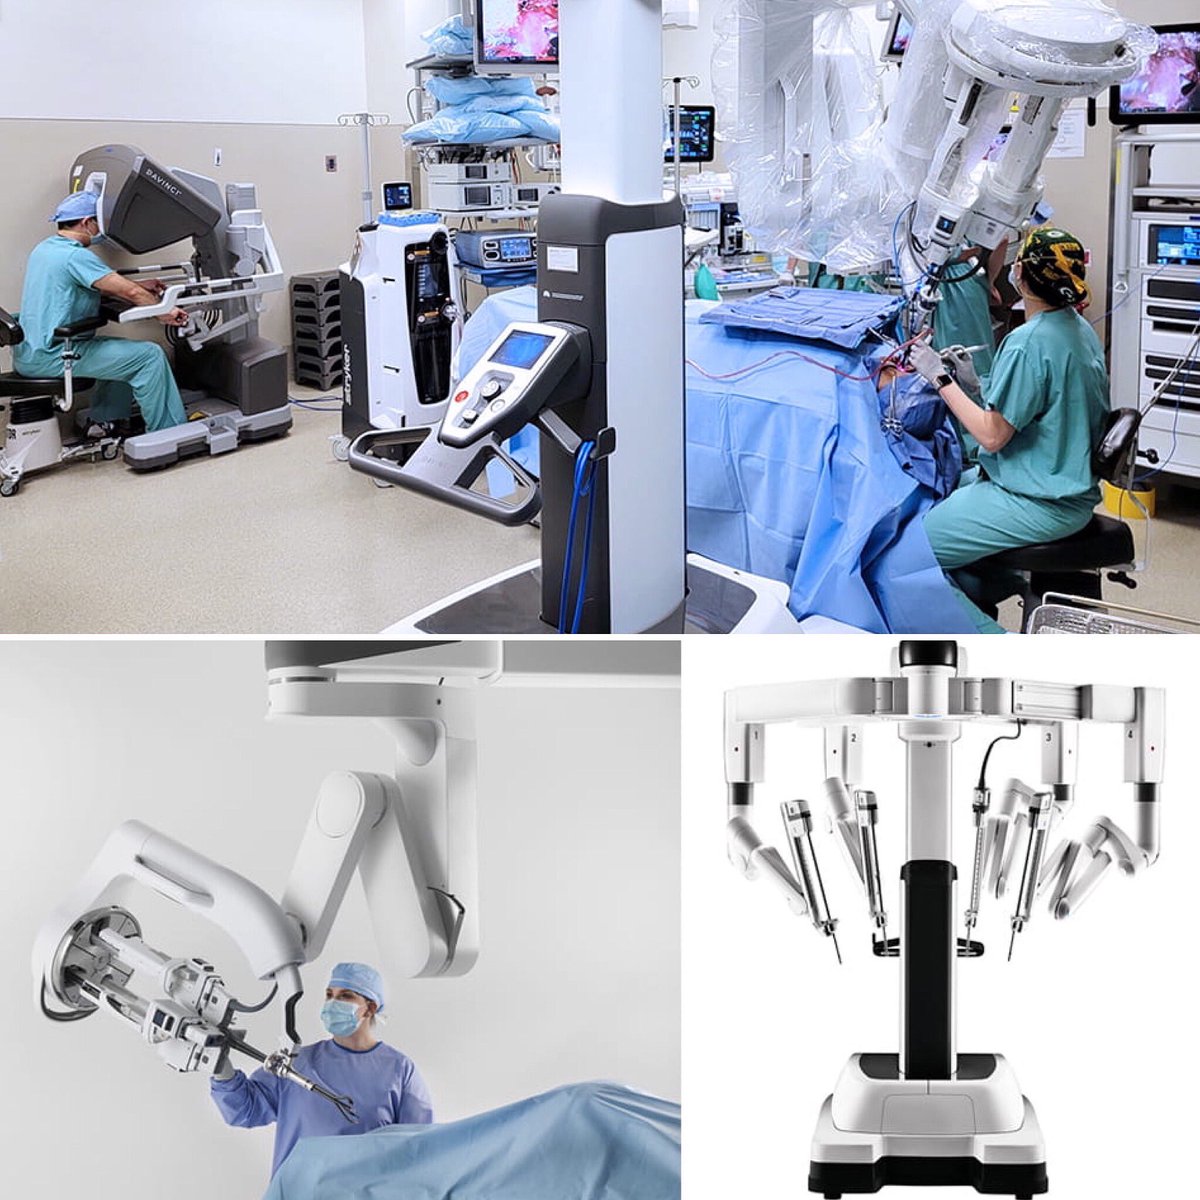 😍 Check out our new surgical robot @ku_ent, a single-port system ideal for surgeries in the mouth & throat. “This is the 1st robot system designed for our needs” — Otolaryngologist @drandresbur (pictured in upper left). #WeAreOto #HeadandNeckCancer #PatientCenteredCare